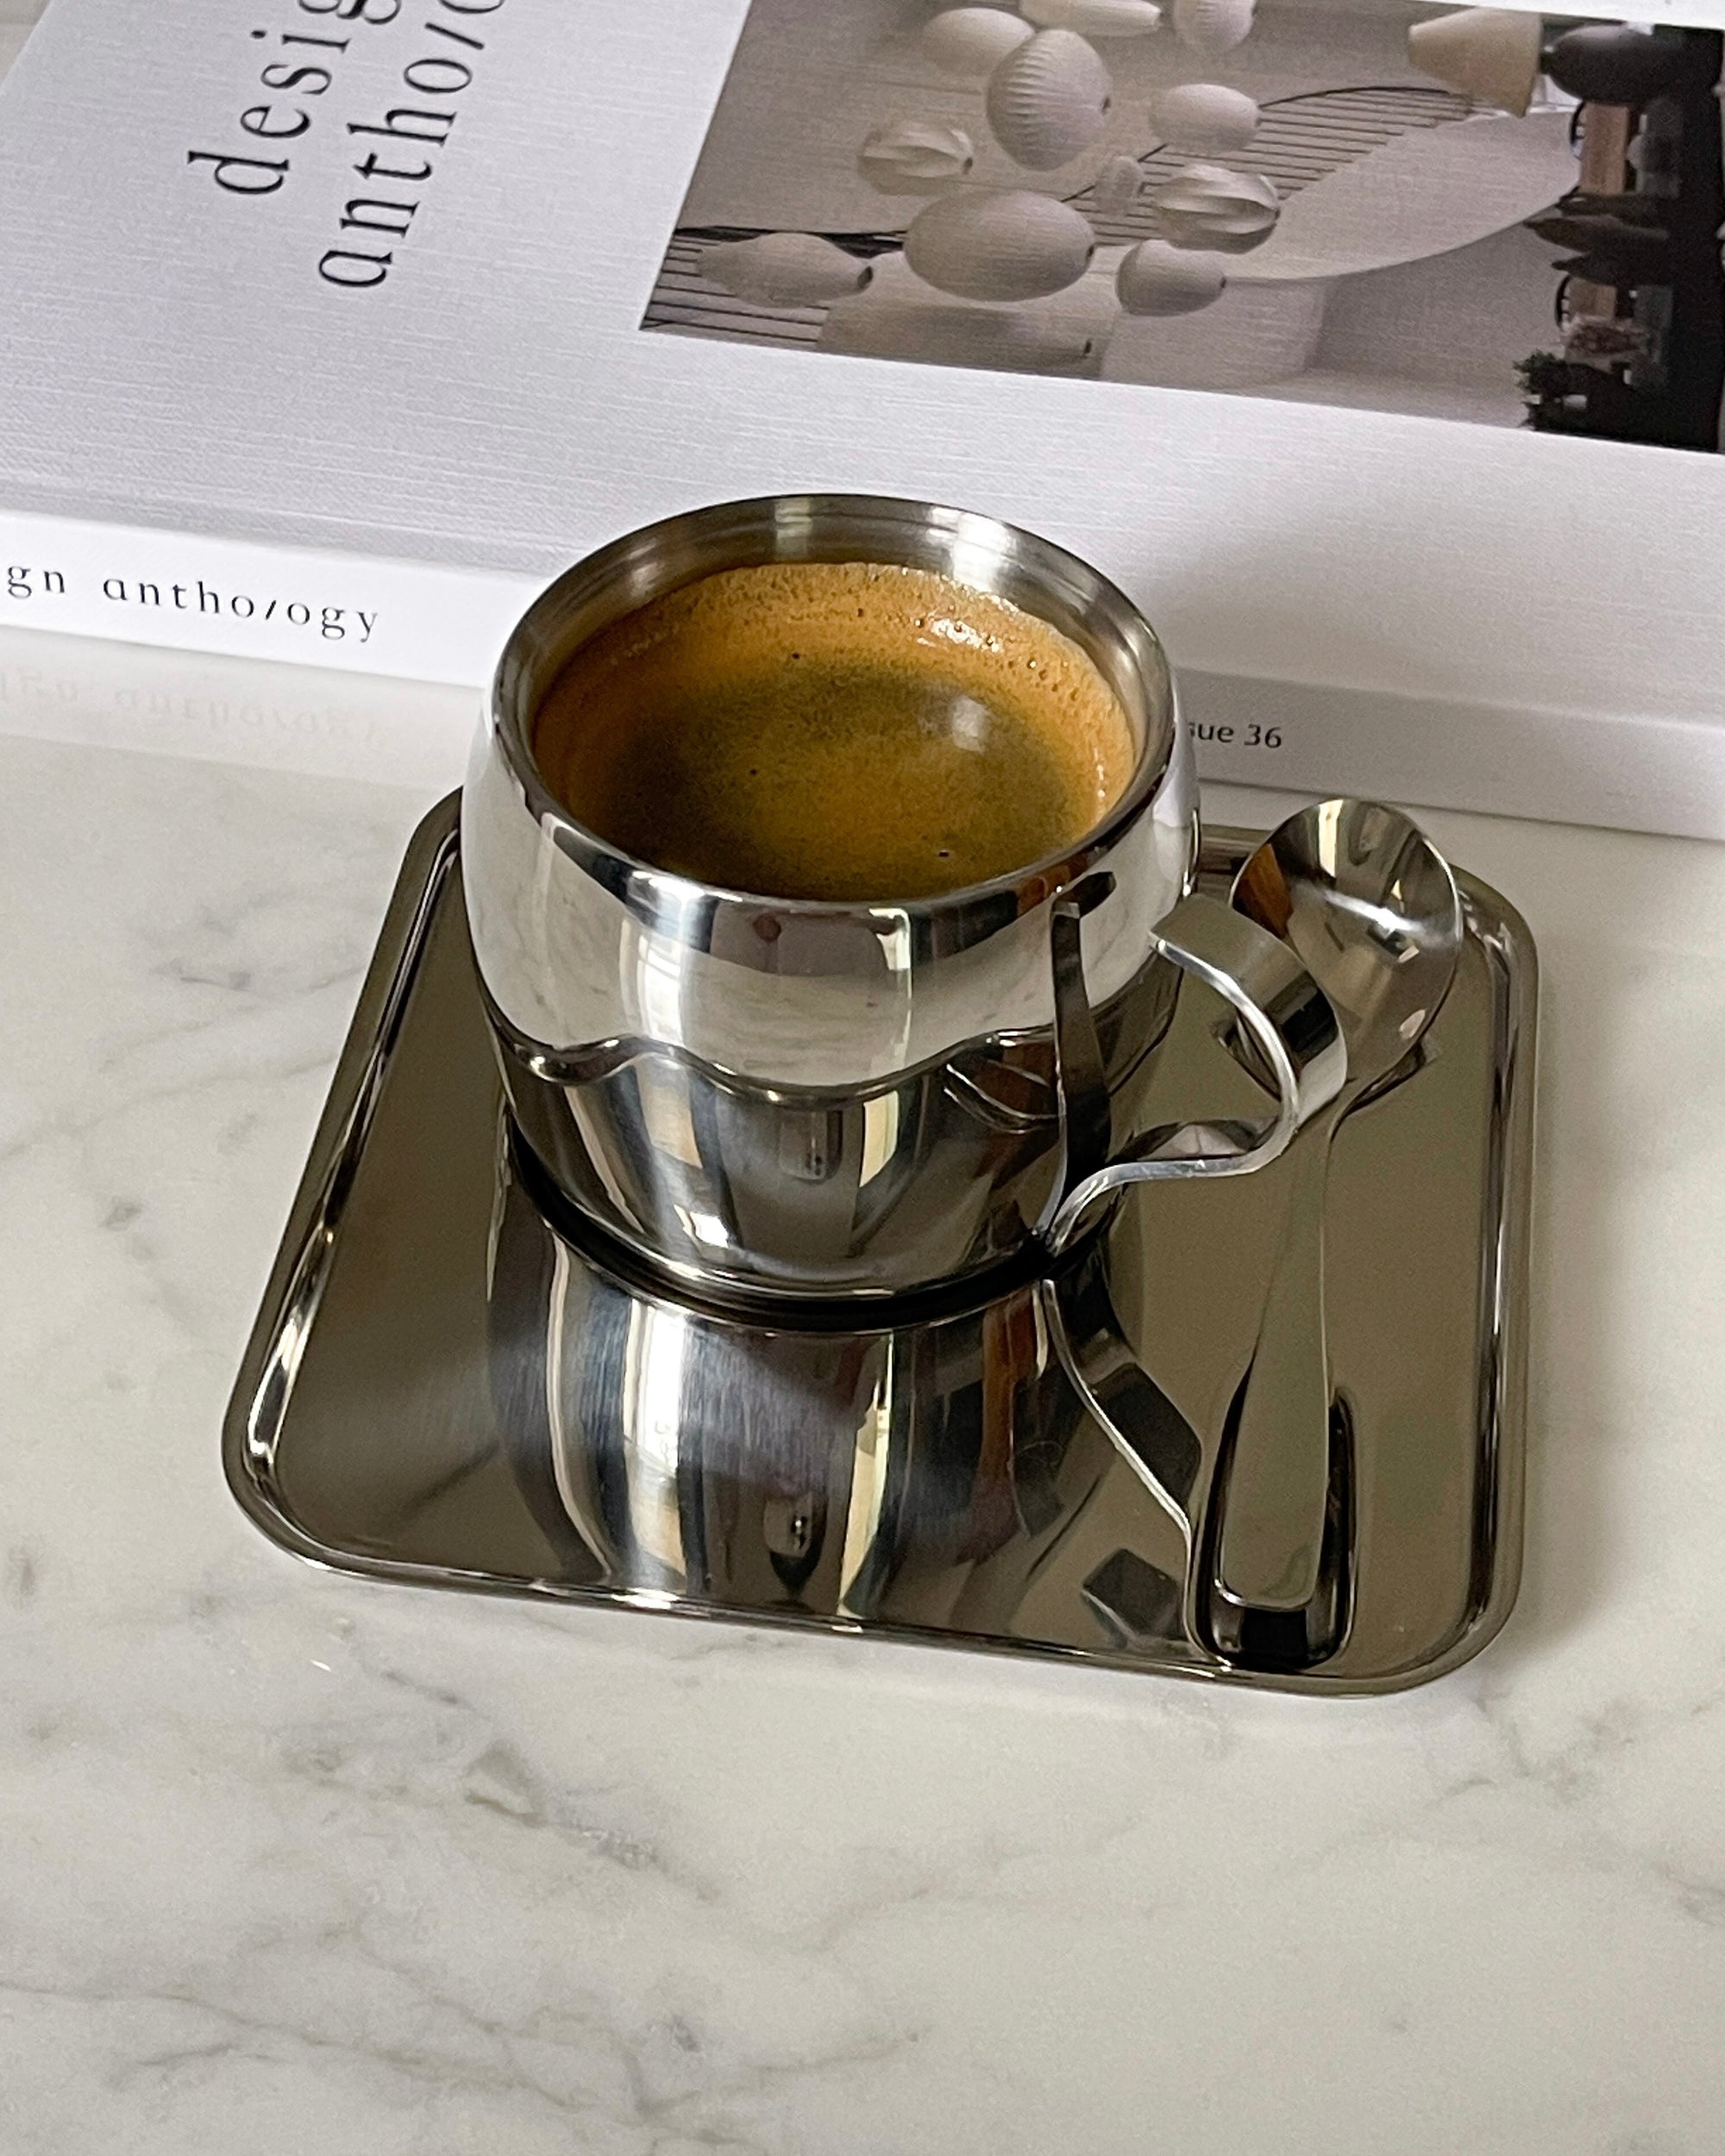 Italian style Steel Expresso Coffee Cup with Saucer &amp; Spoon